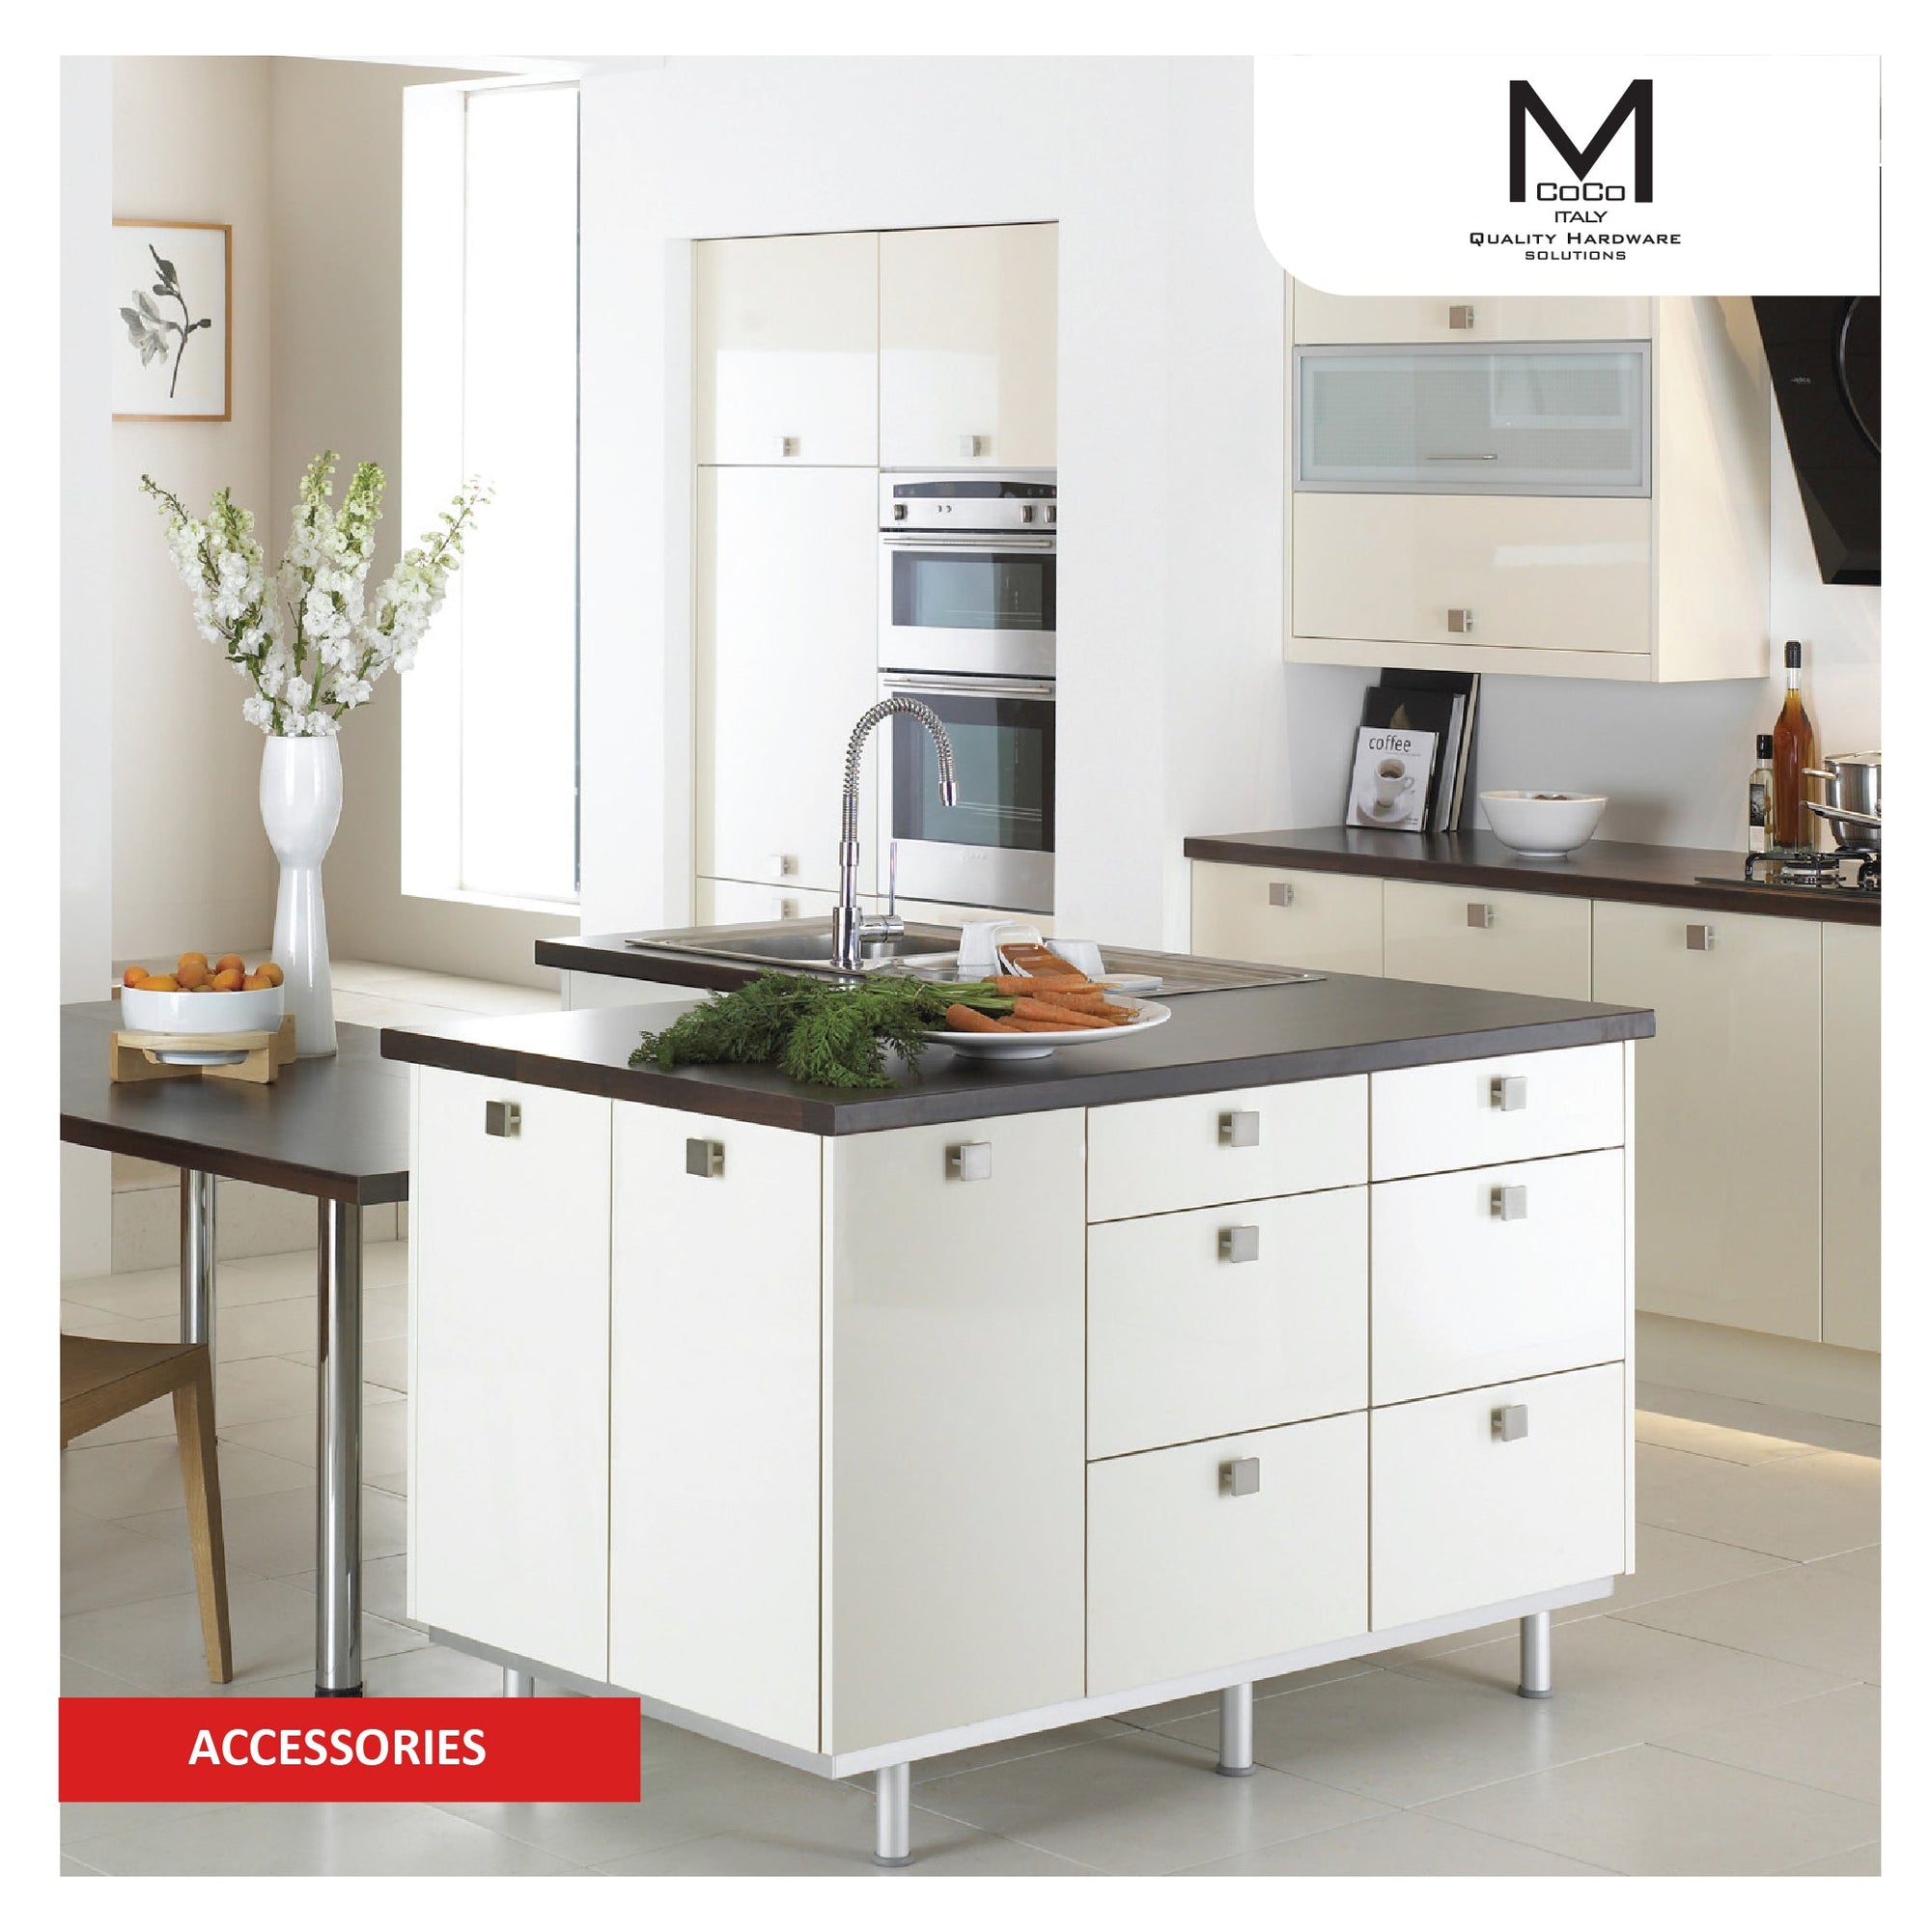 Mcoco kitchen, door, cabinet, drawer, and wardrobe accessories by M. M. Noorbhoy & Co - Stylish and functional solutions for your space.